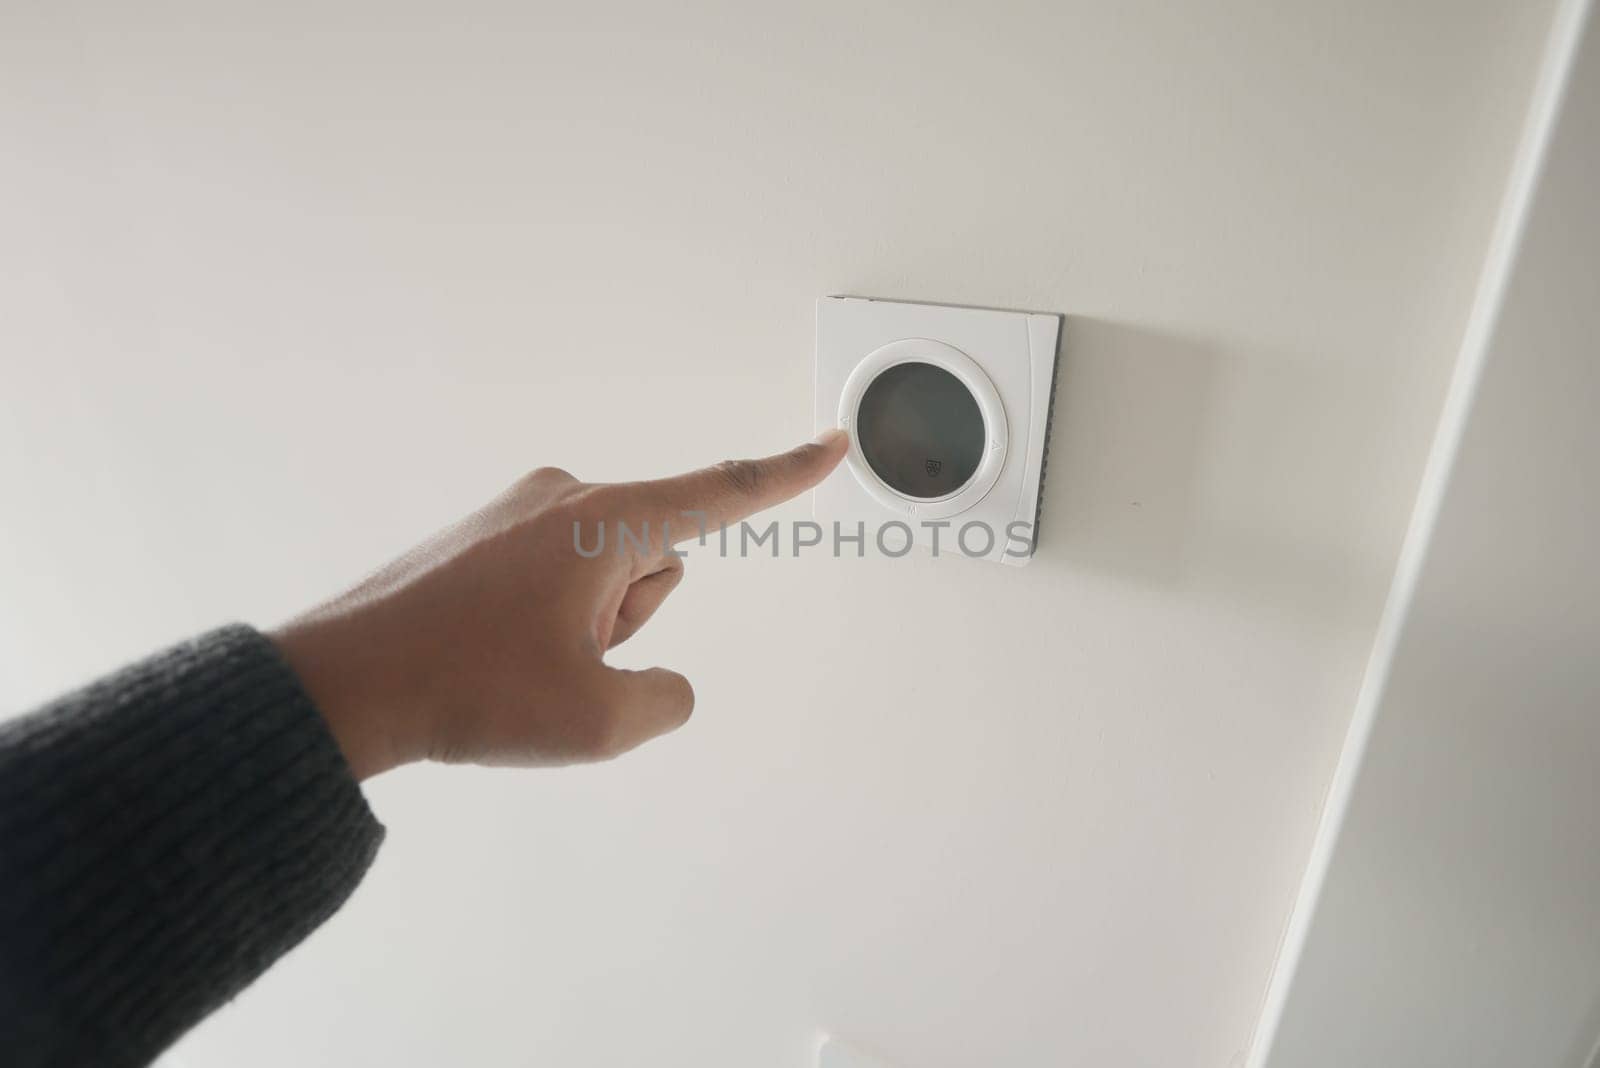 Hand adjusting smart home thermostat on white wall, displaying modern technology and interior system